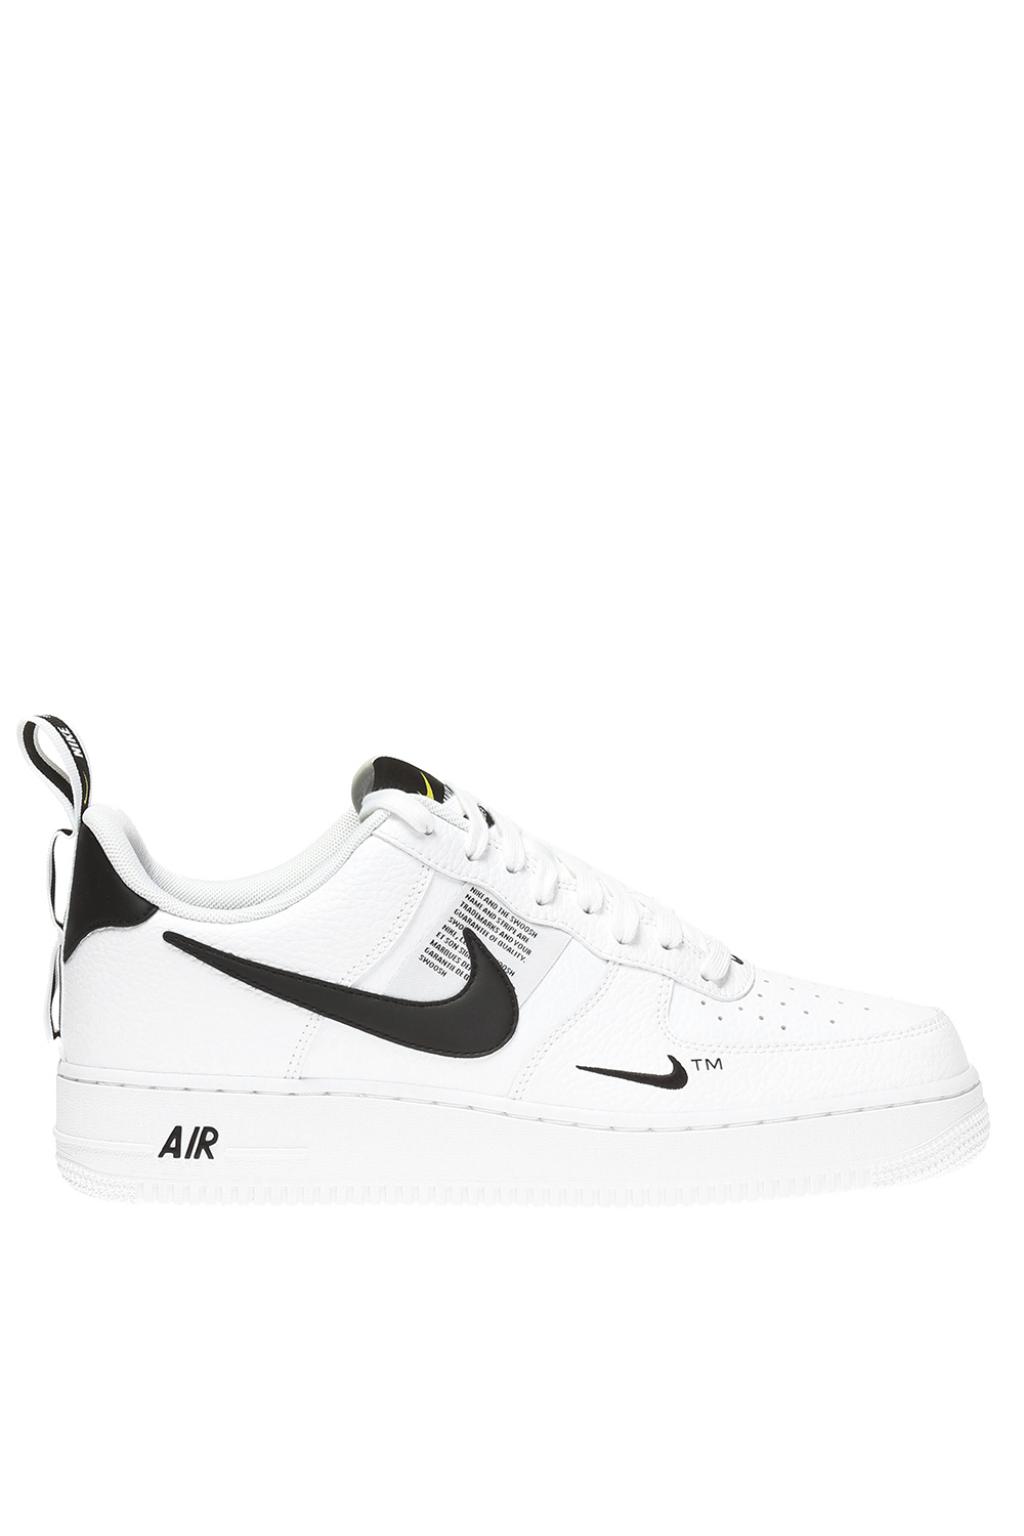 Nike 'Air Force 1 '07 LV8 Utility' sneakers, Men's Shoes